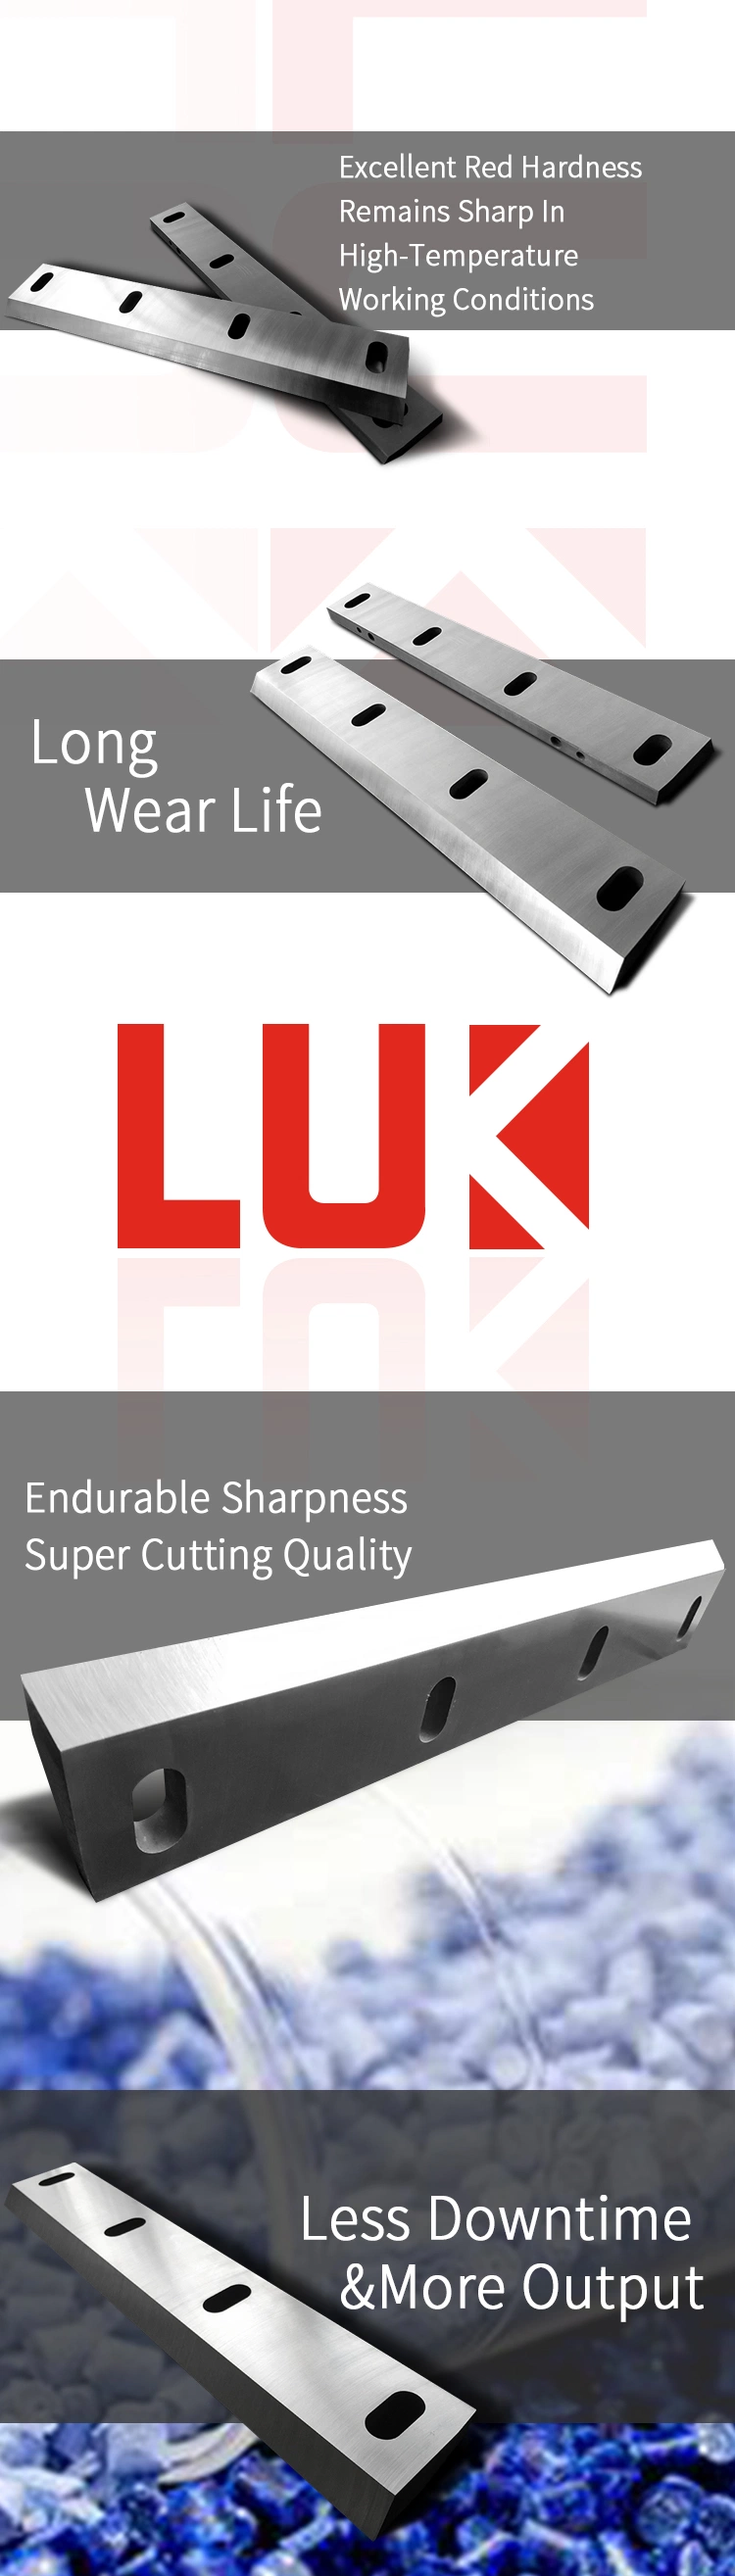 Factory Price Metal Shear Knives and Metal Working Blades